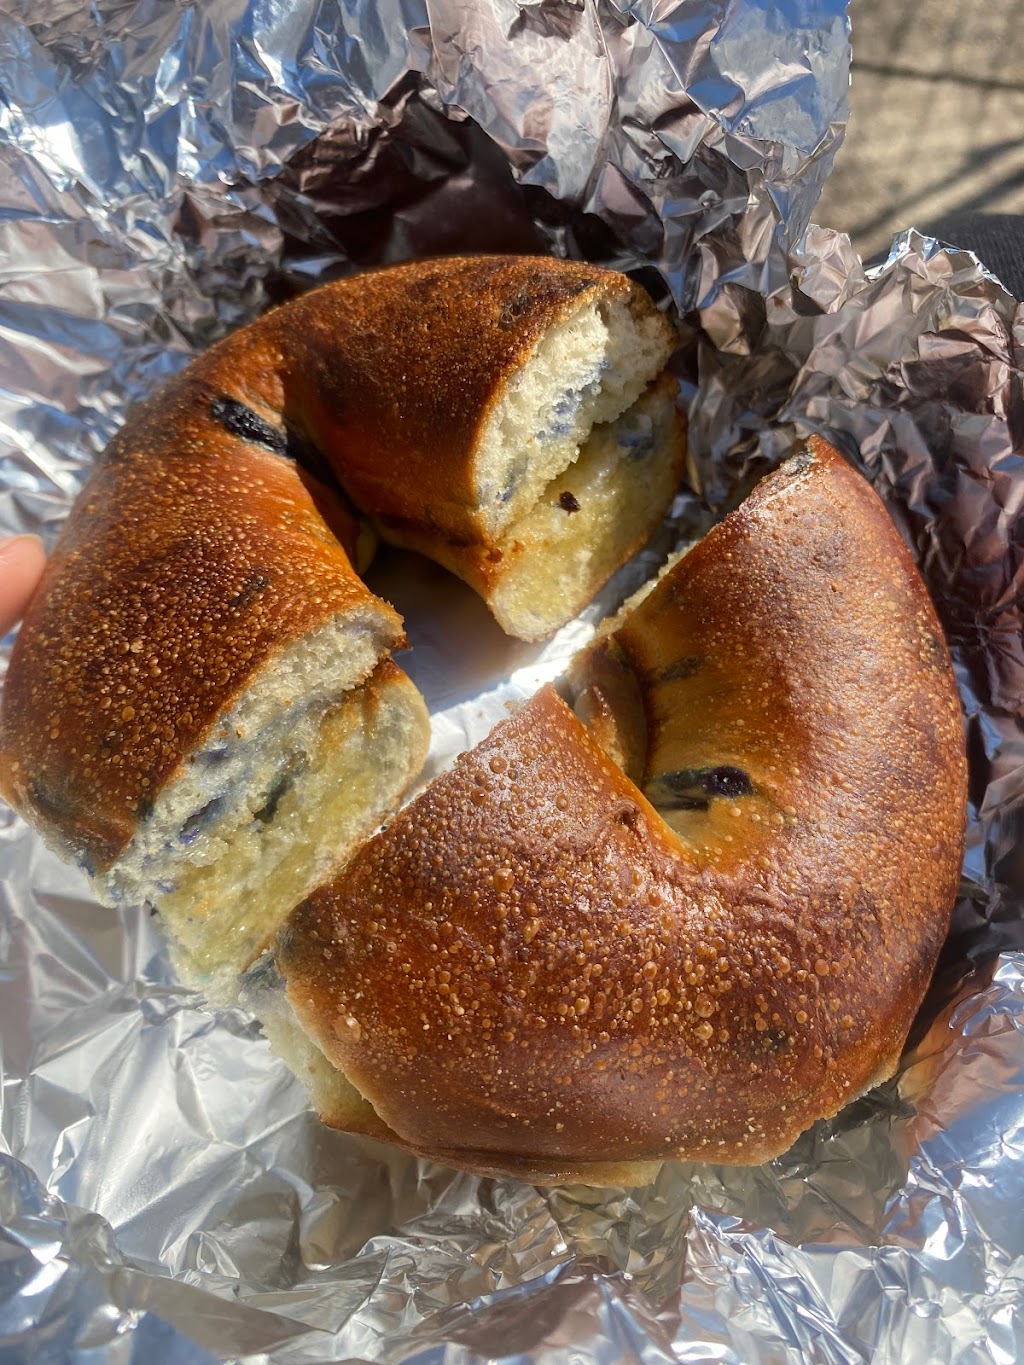 Vinny Gs Bagels and Deli | 401 Broad St, Florence, NJ 08518 | Phone: (609) 499-9300